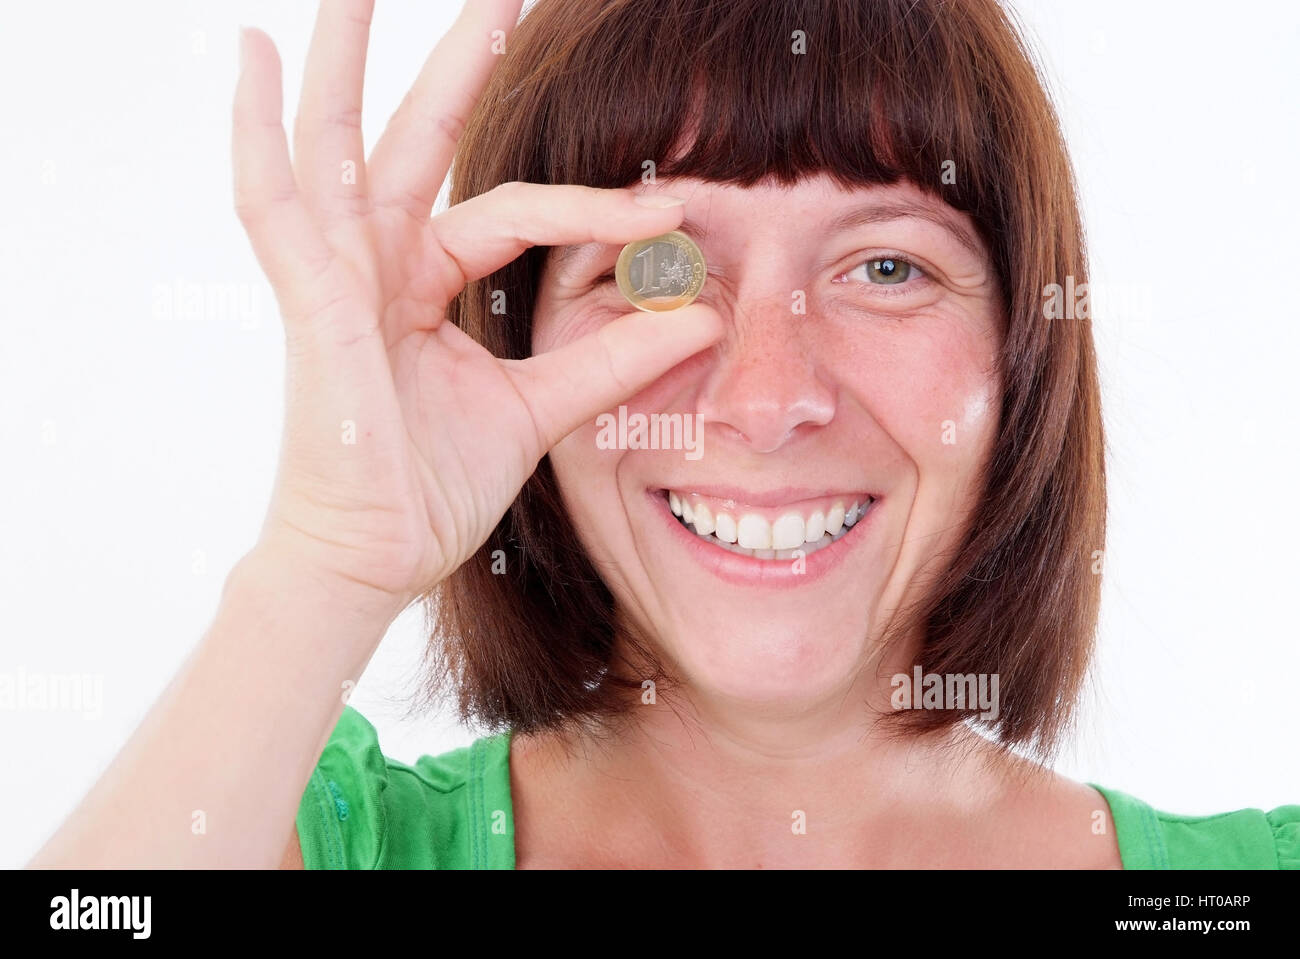 Frau mit Euromuenze vor dem Auge - woman with Euro coin Stock Photo